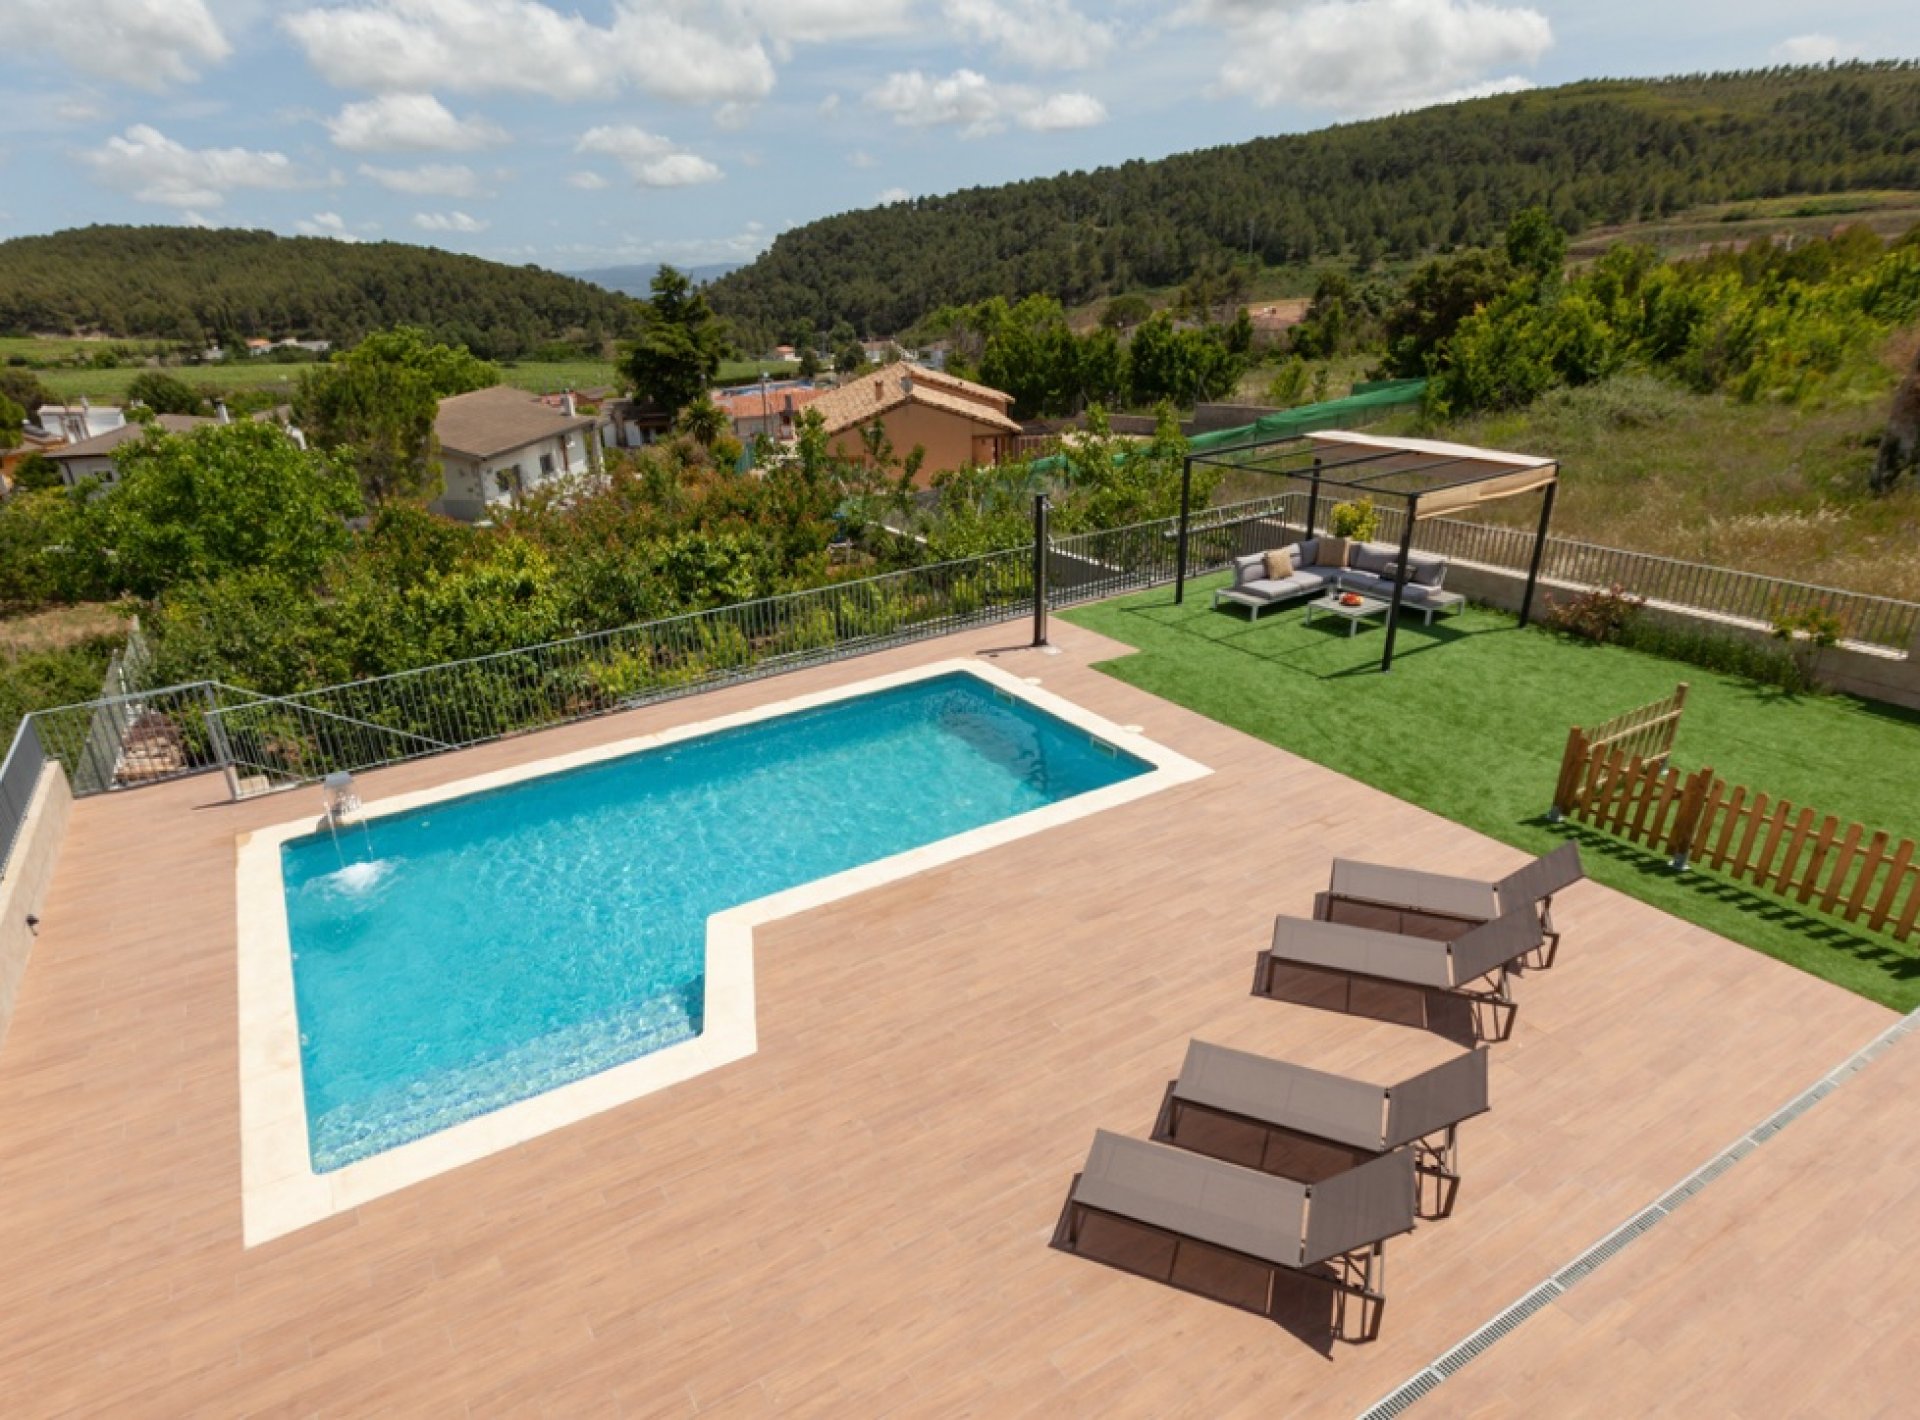 Penedes area, swimming pool